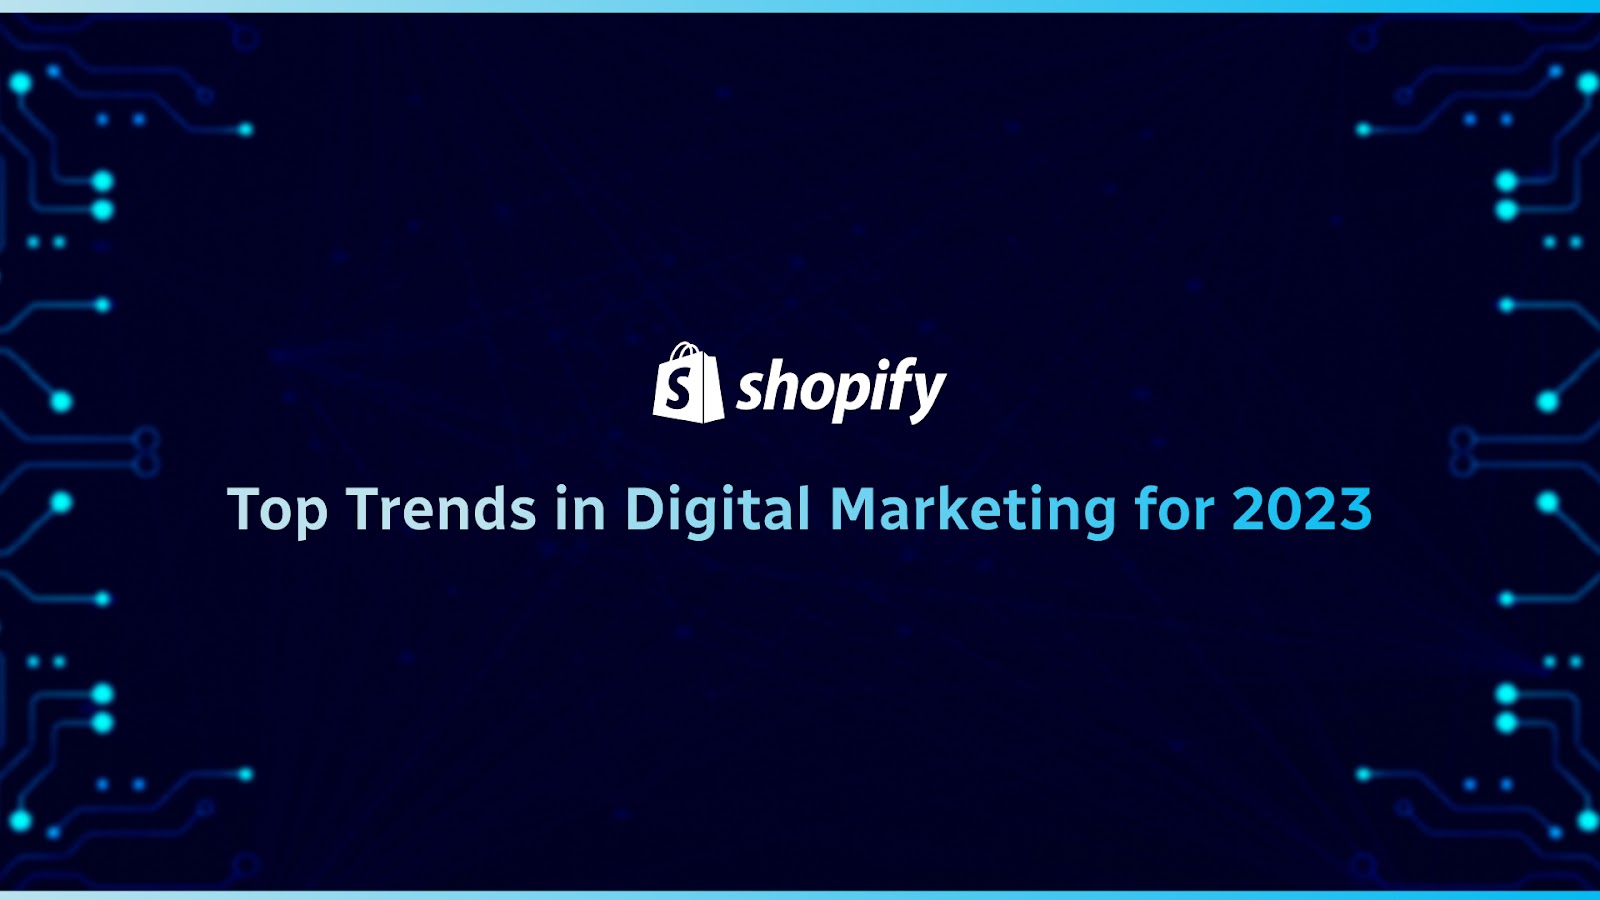 Top Trends in Digital Marketing for 2023